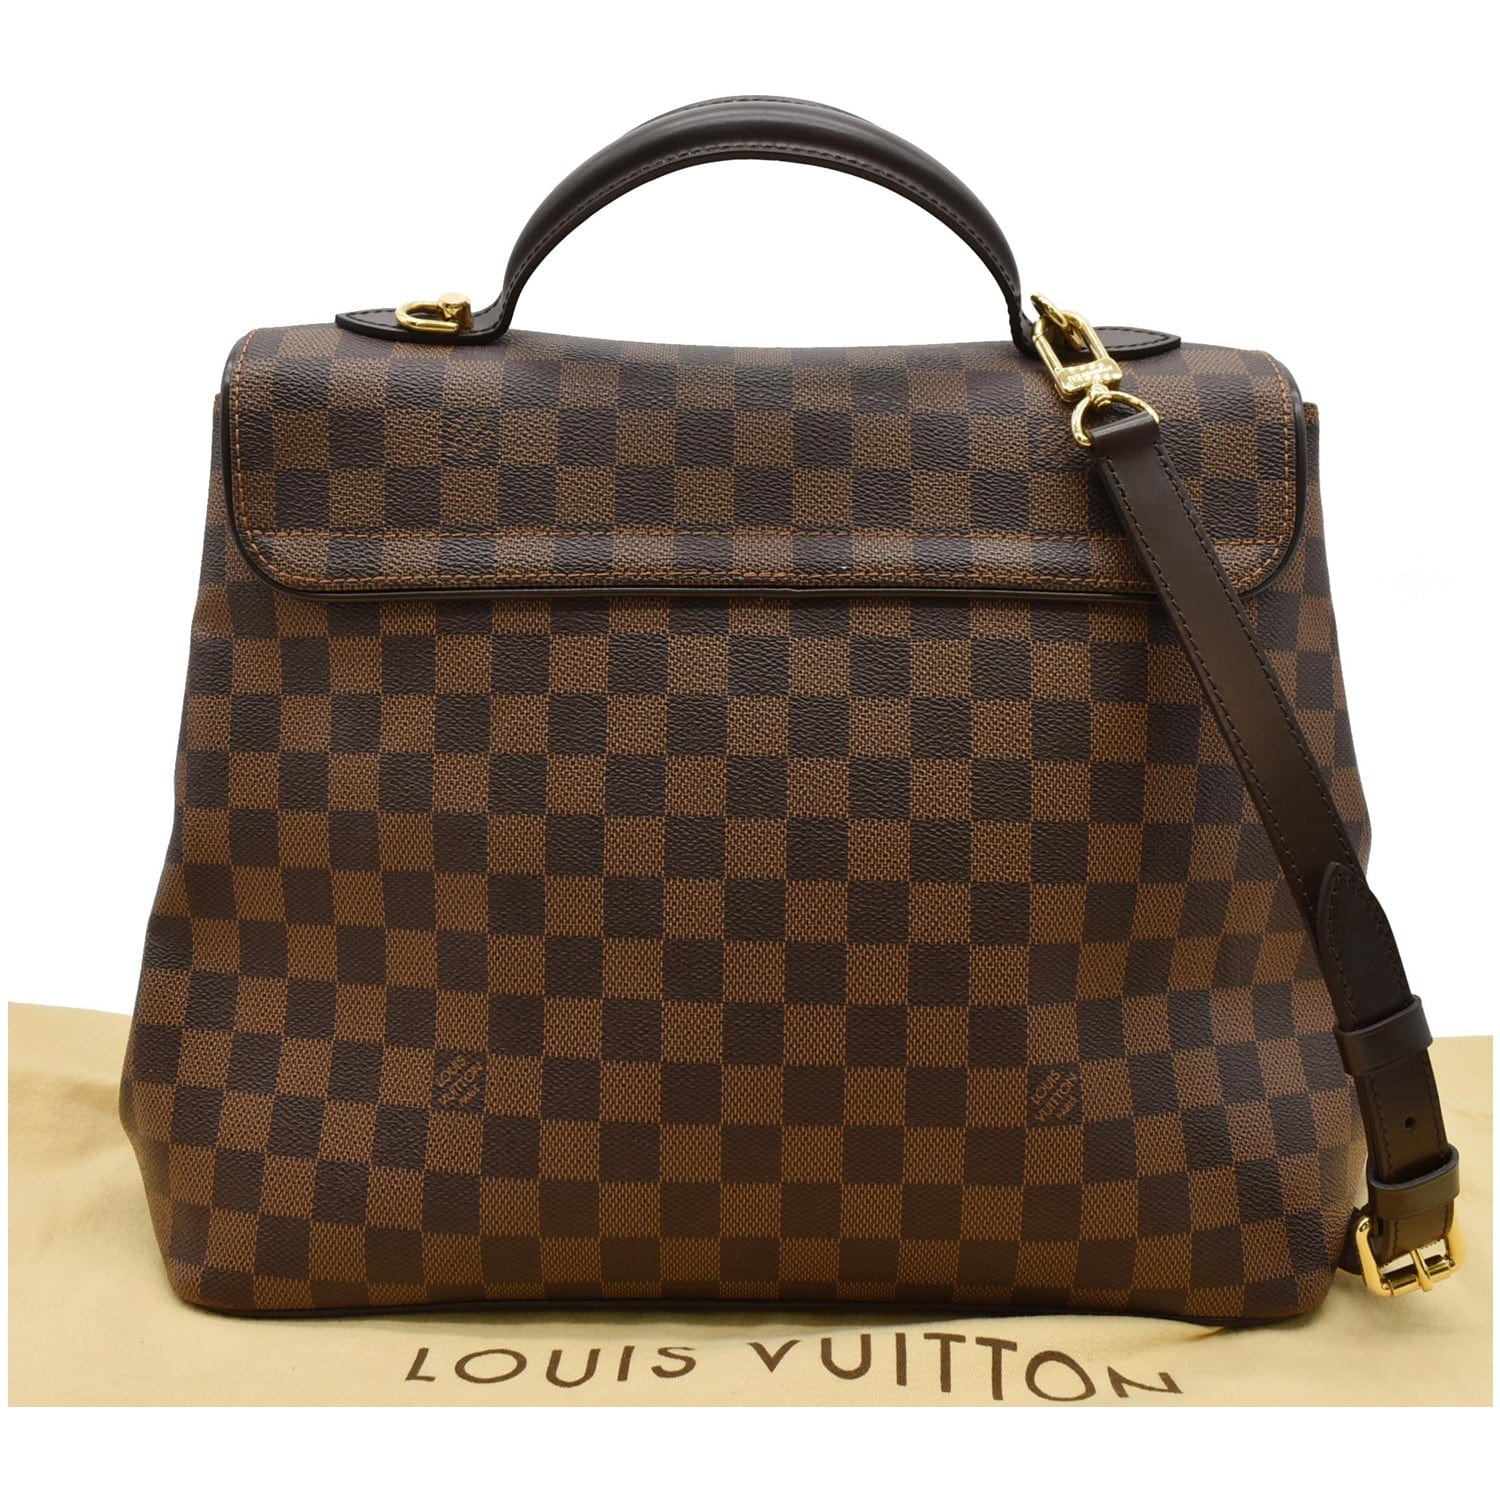 LOUIS VUITTON Authentic Women's Monogram Hand Bag Malesherbes Brown  Leather